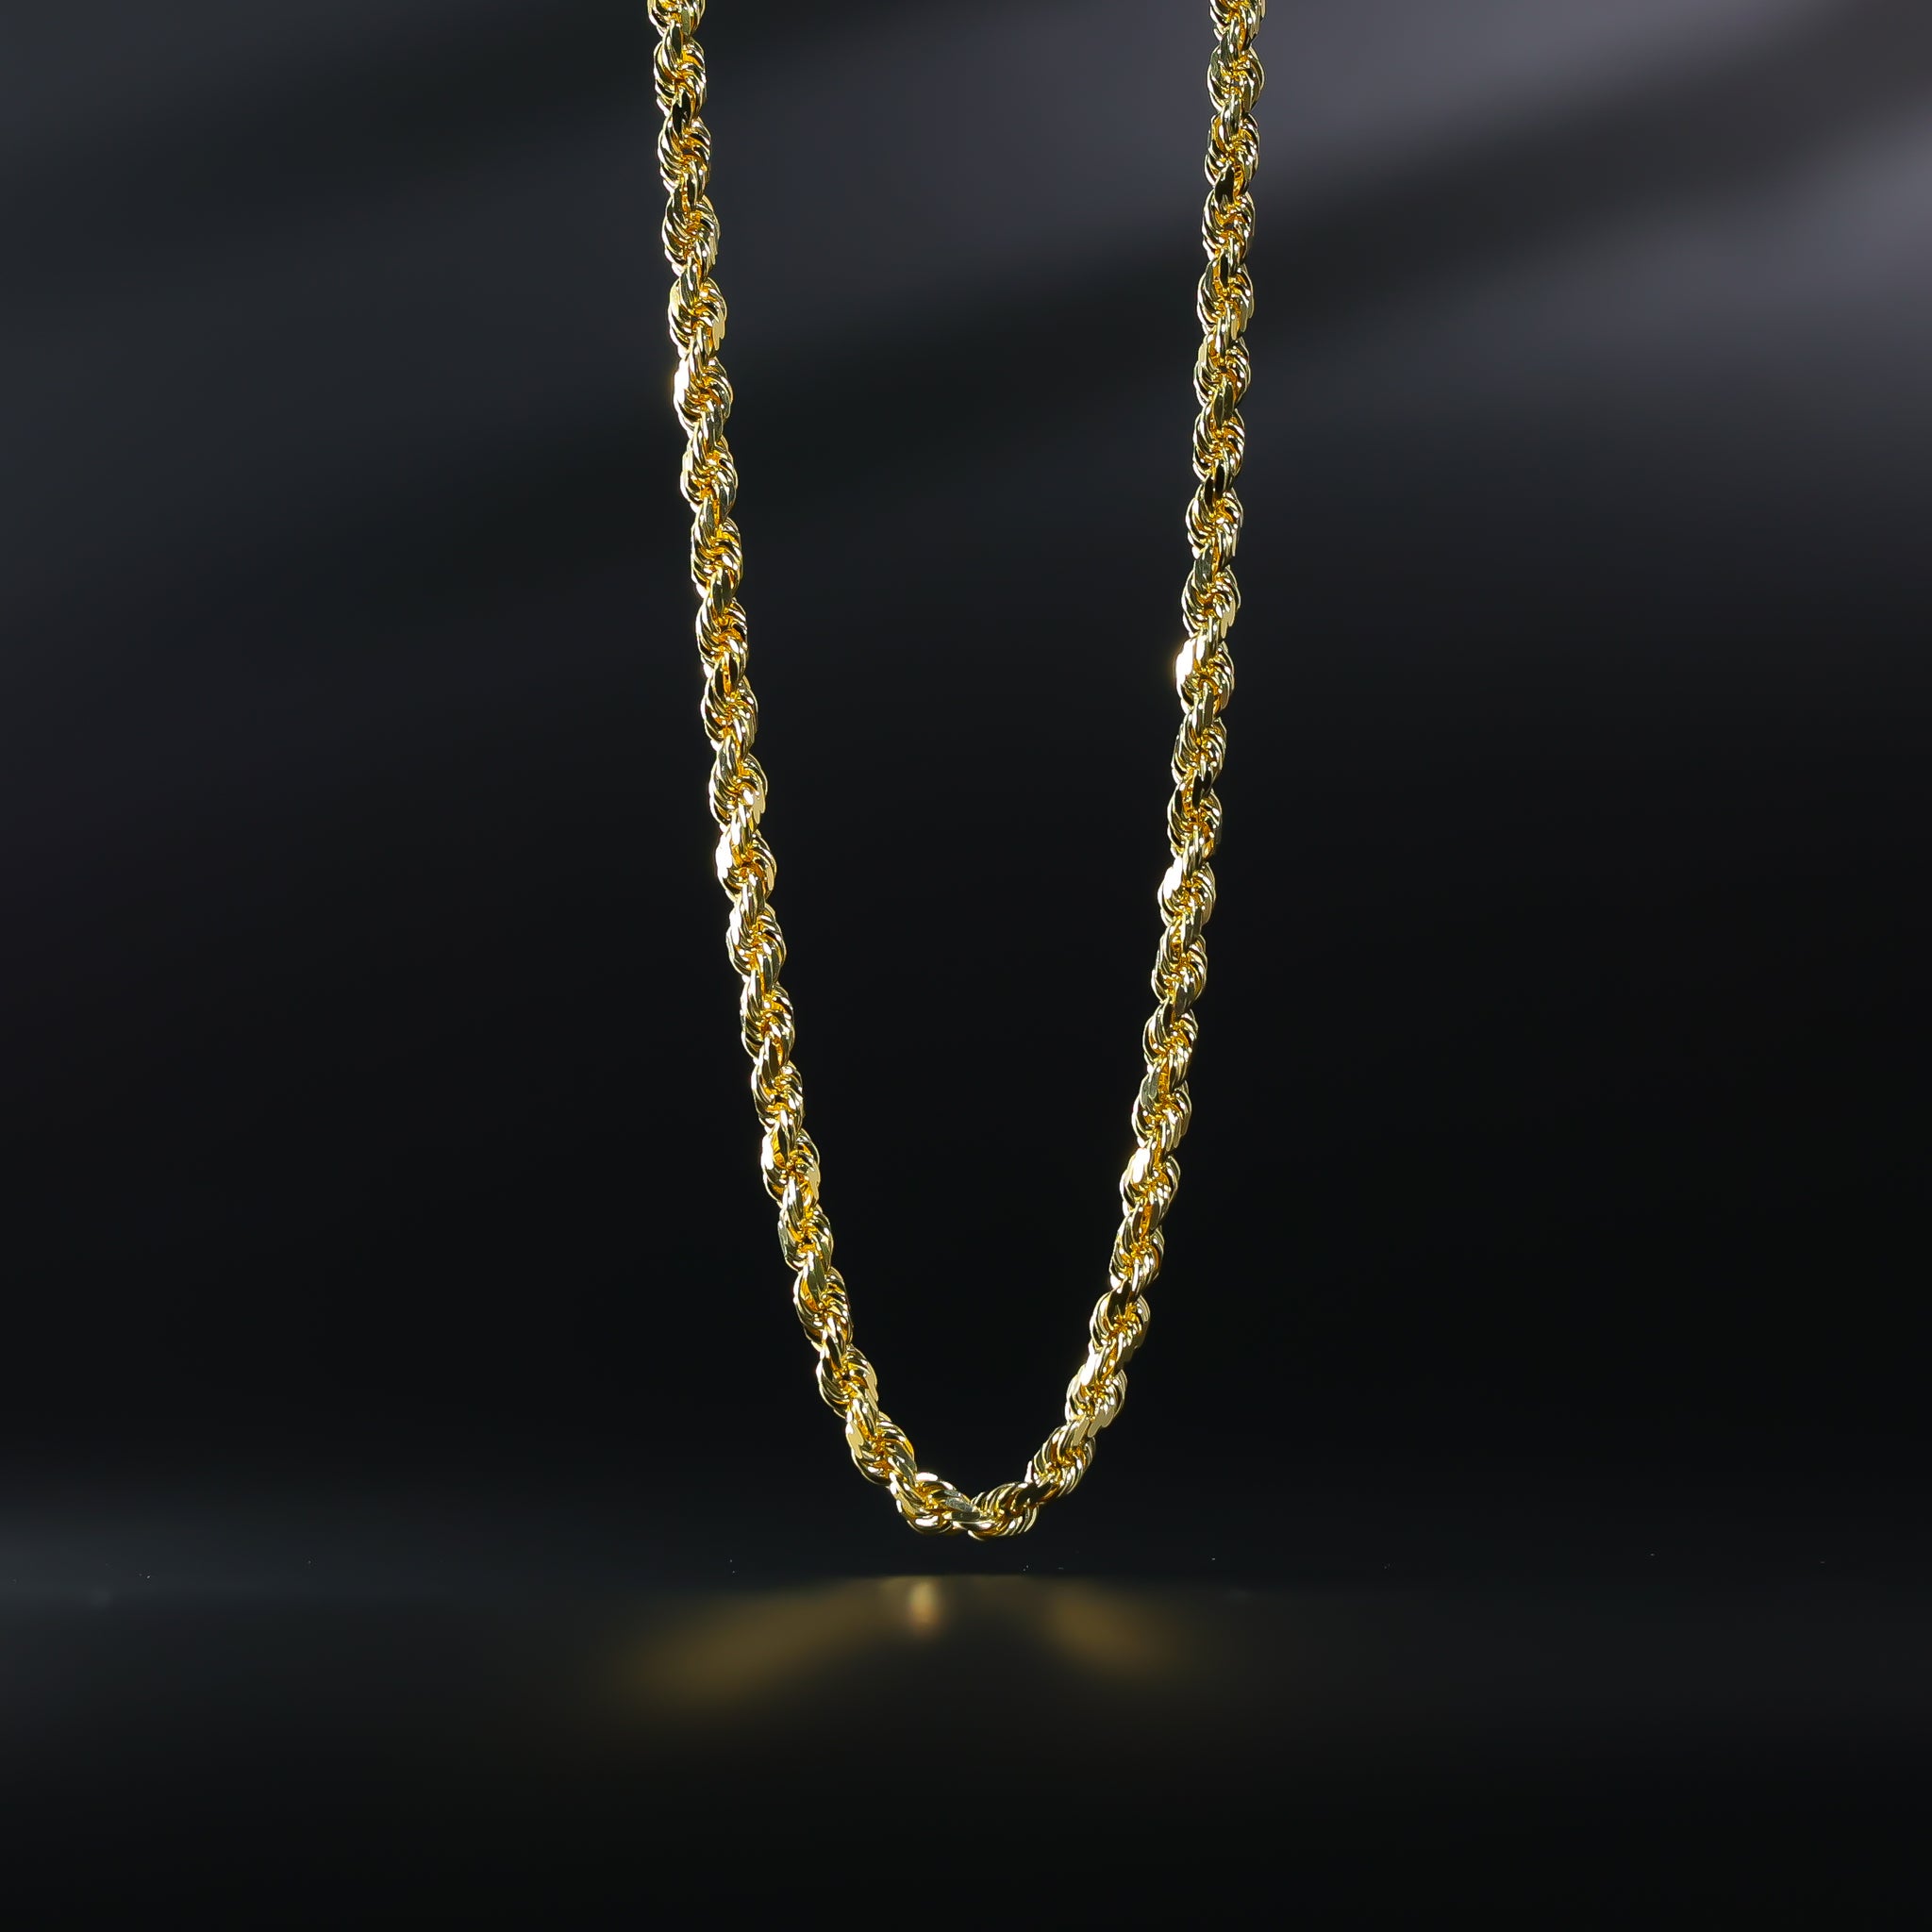 10K Yellow Gold Solid Diamond Cut Rope Chain Necklace (4mm, 22 inch), adult Unisex, Size: 4 mm